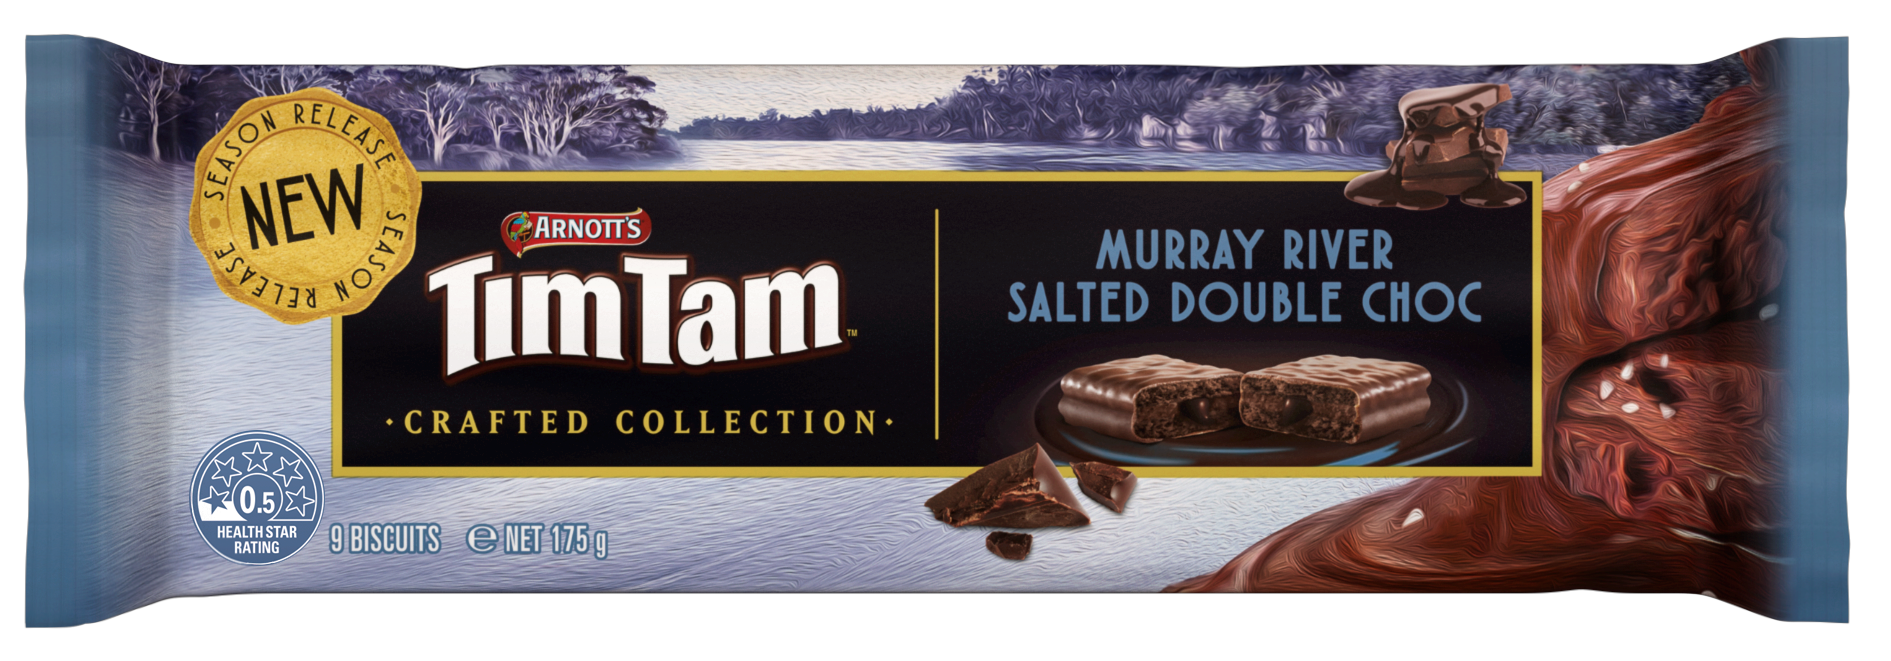 Murray River Salted Double Choc